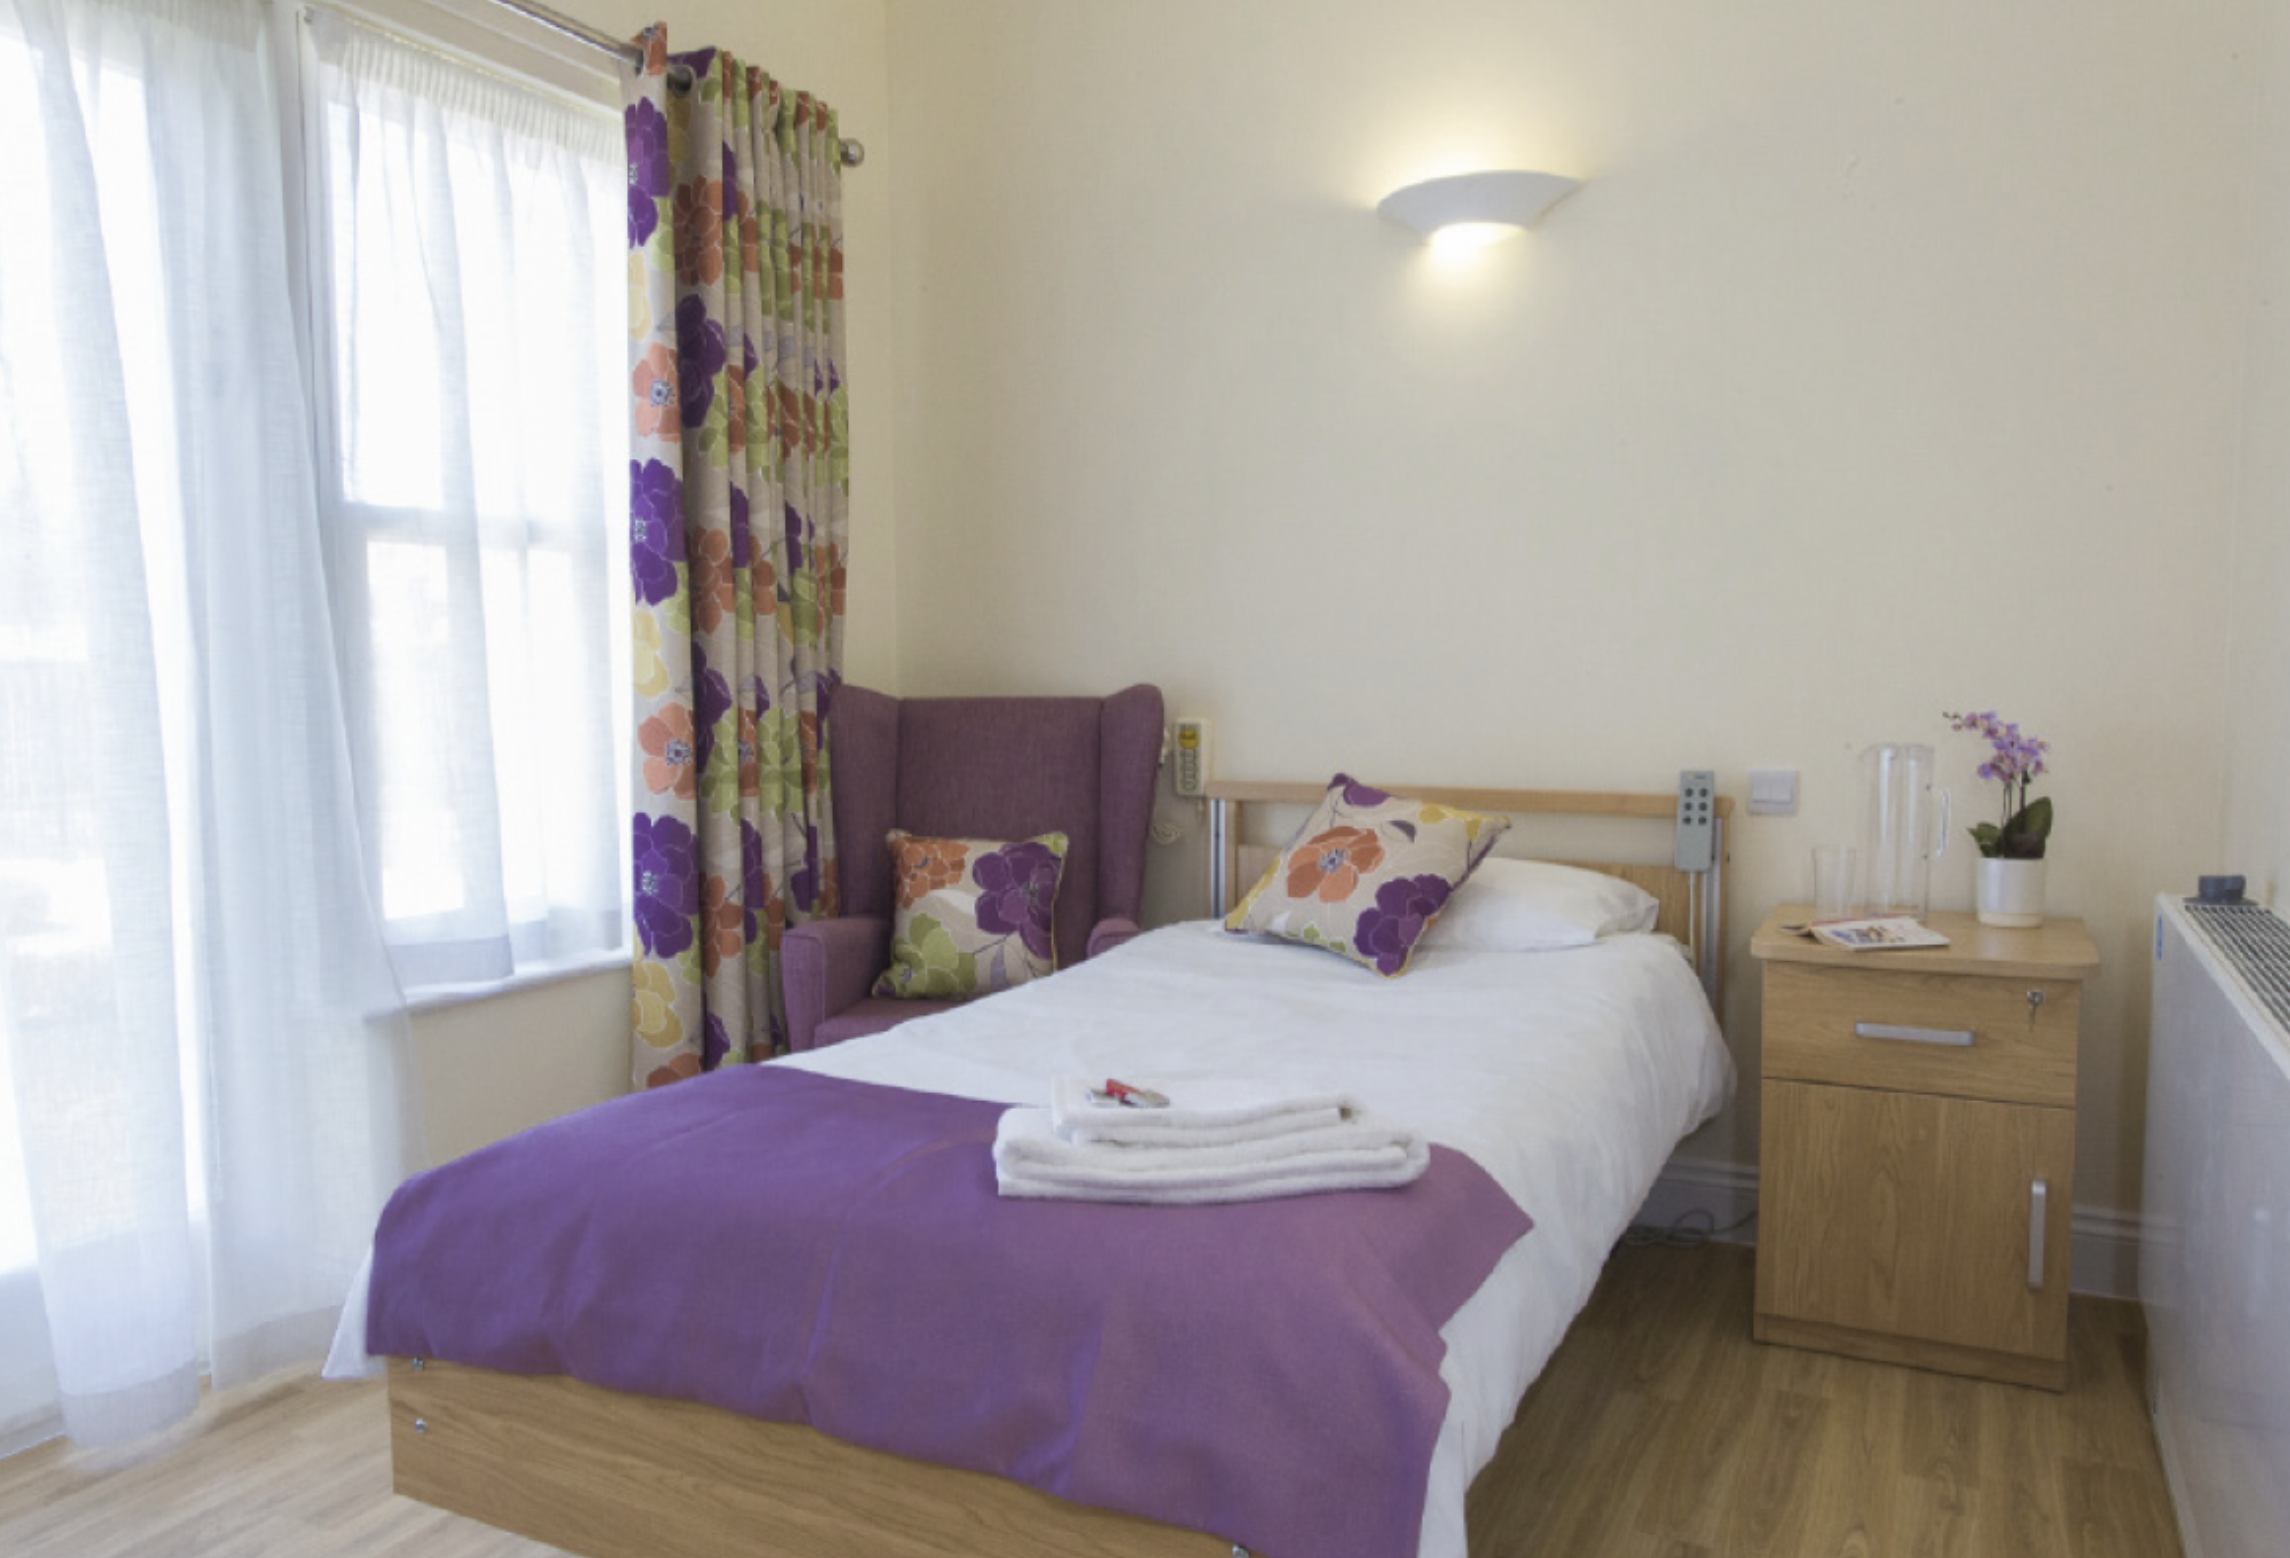 Bedroom of Westgate House care home in Ware, Hertfordshire